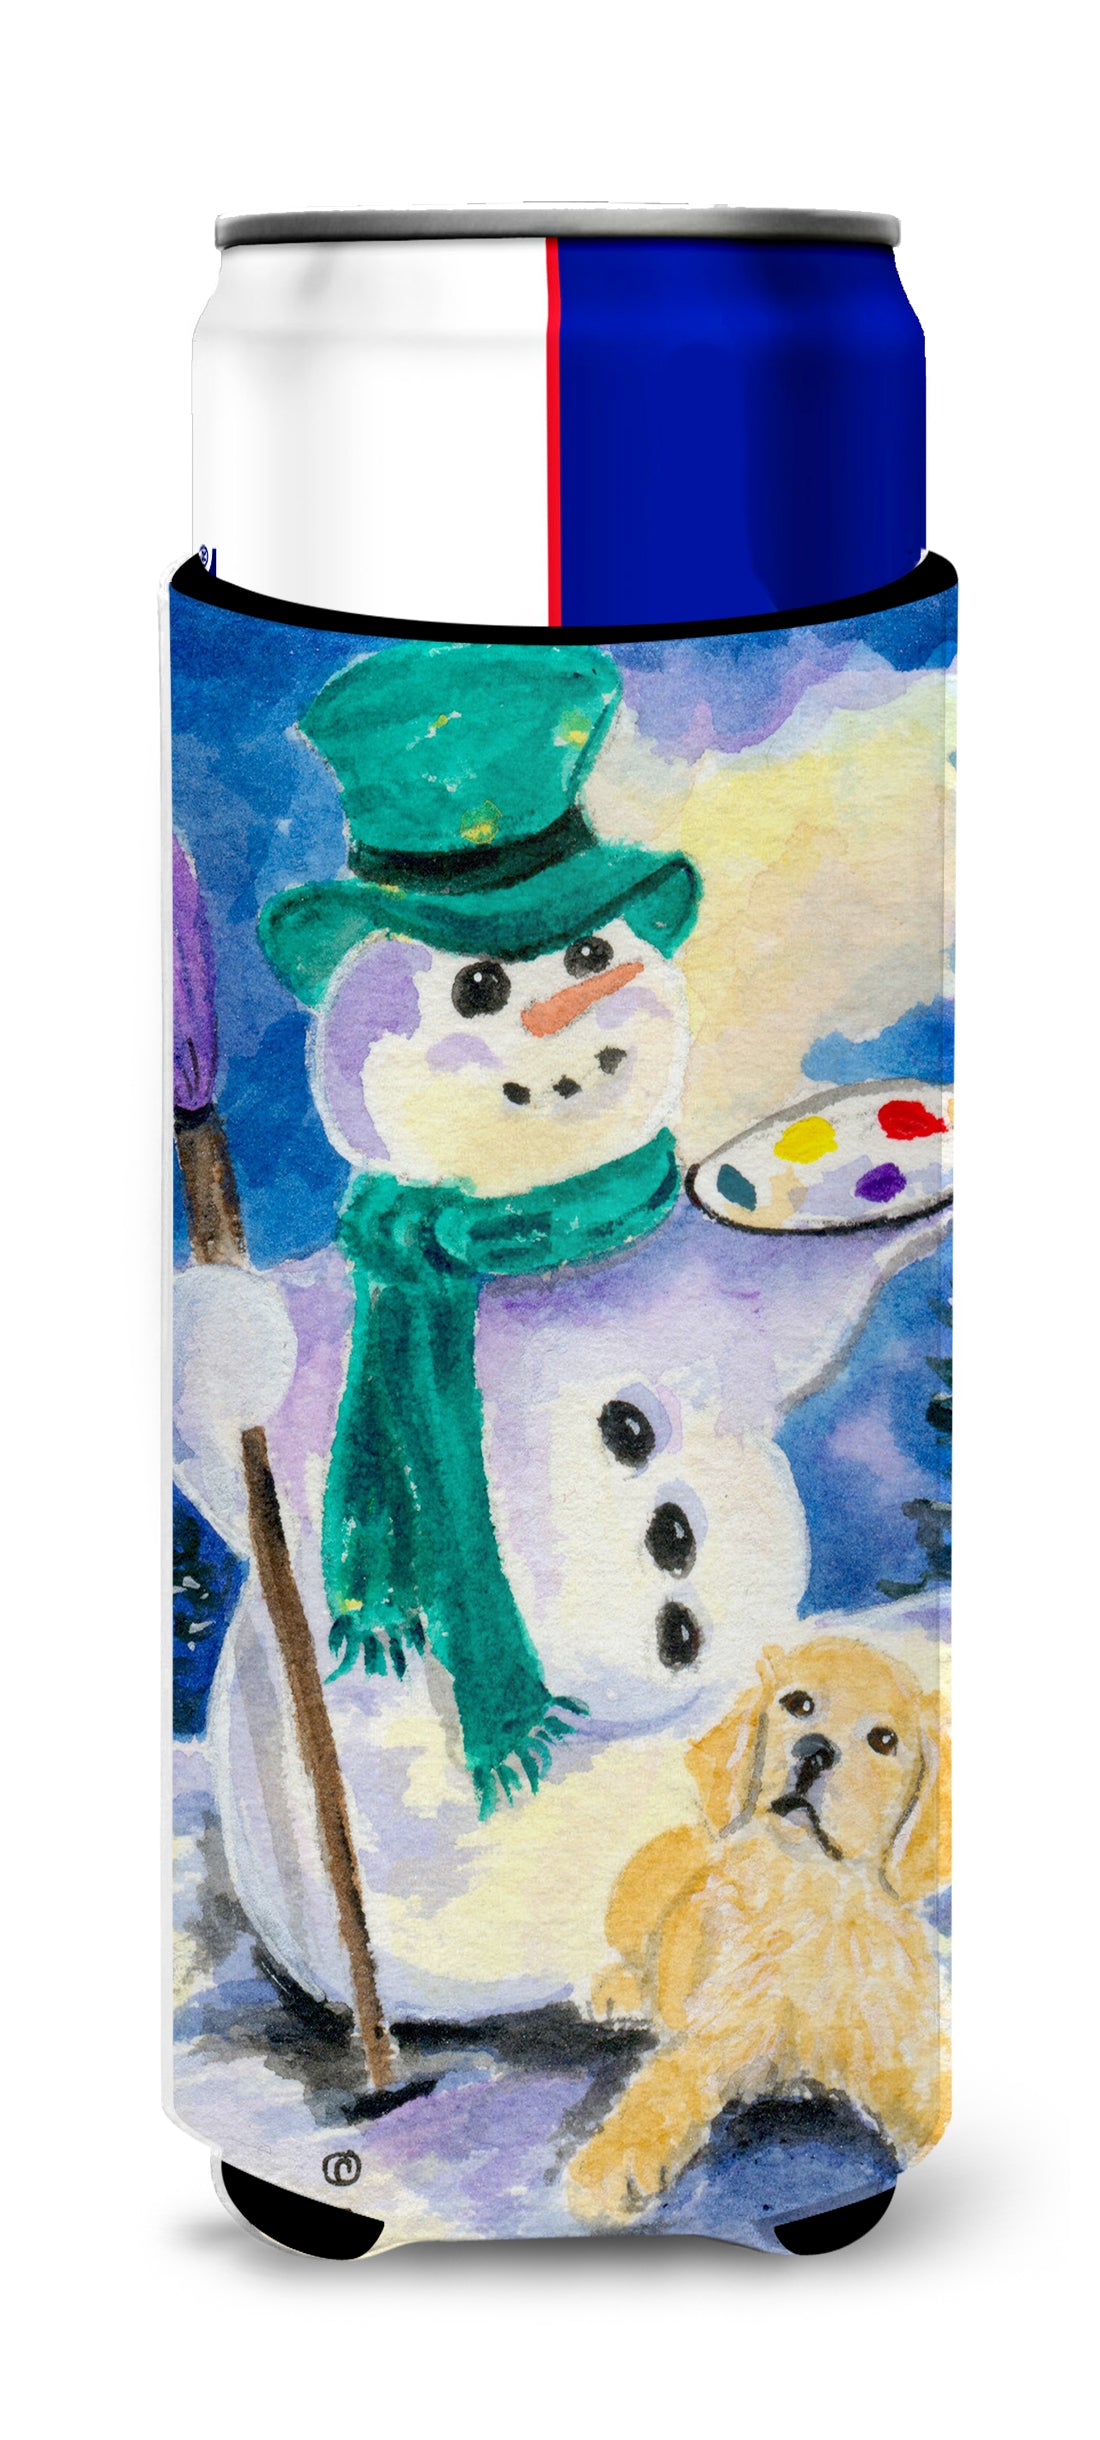 Snowman with Golden Retriever Ultra Beverage Insulators for slim cans SS8994MUK.